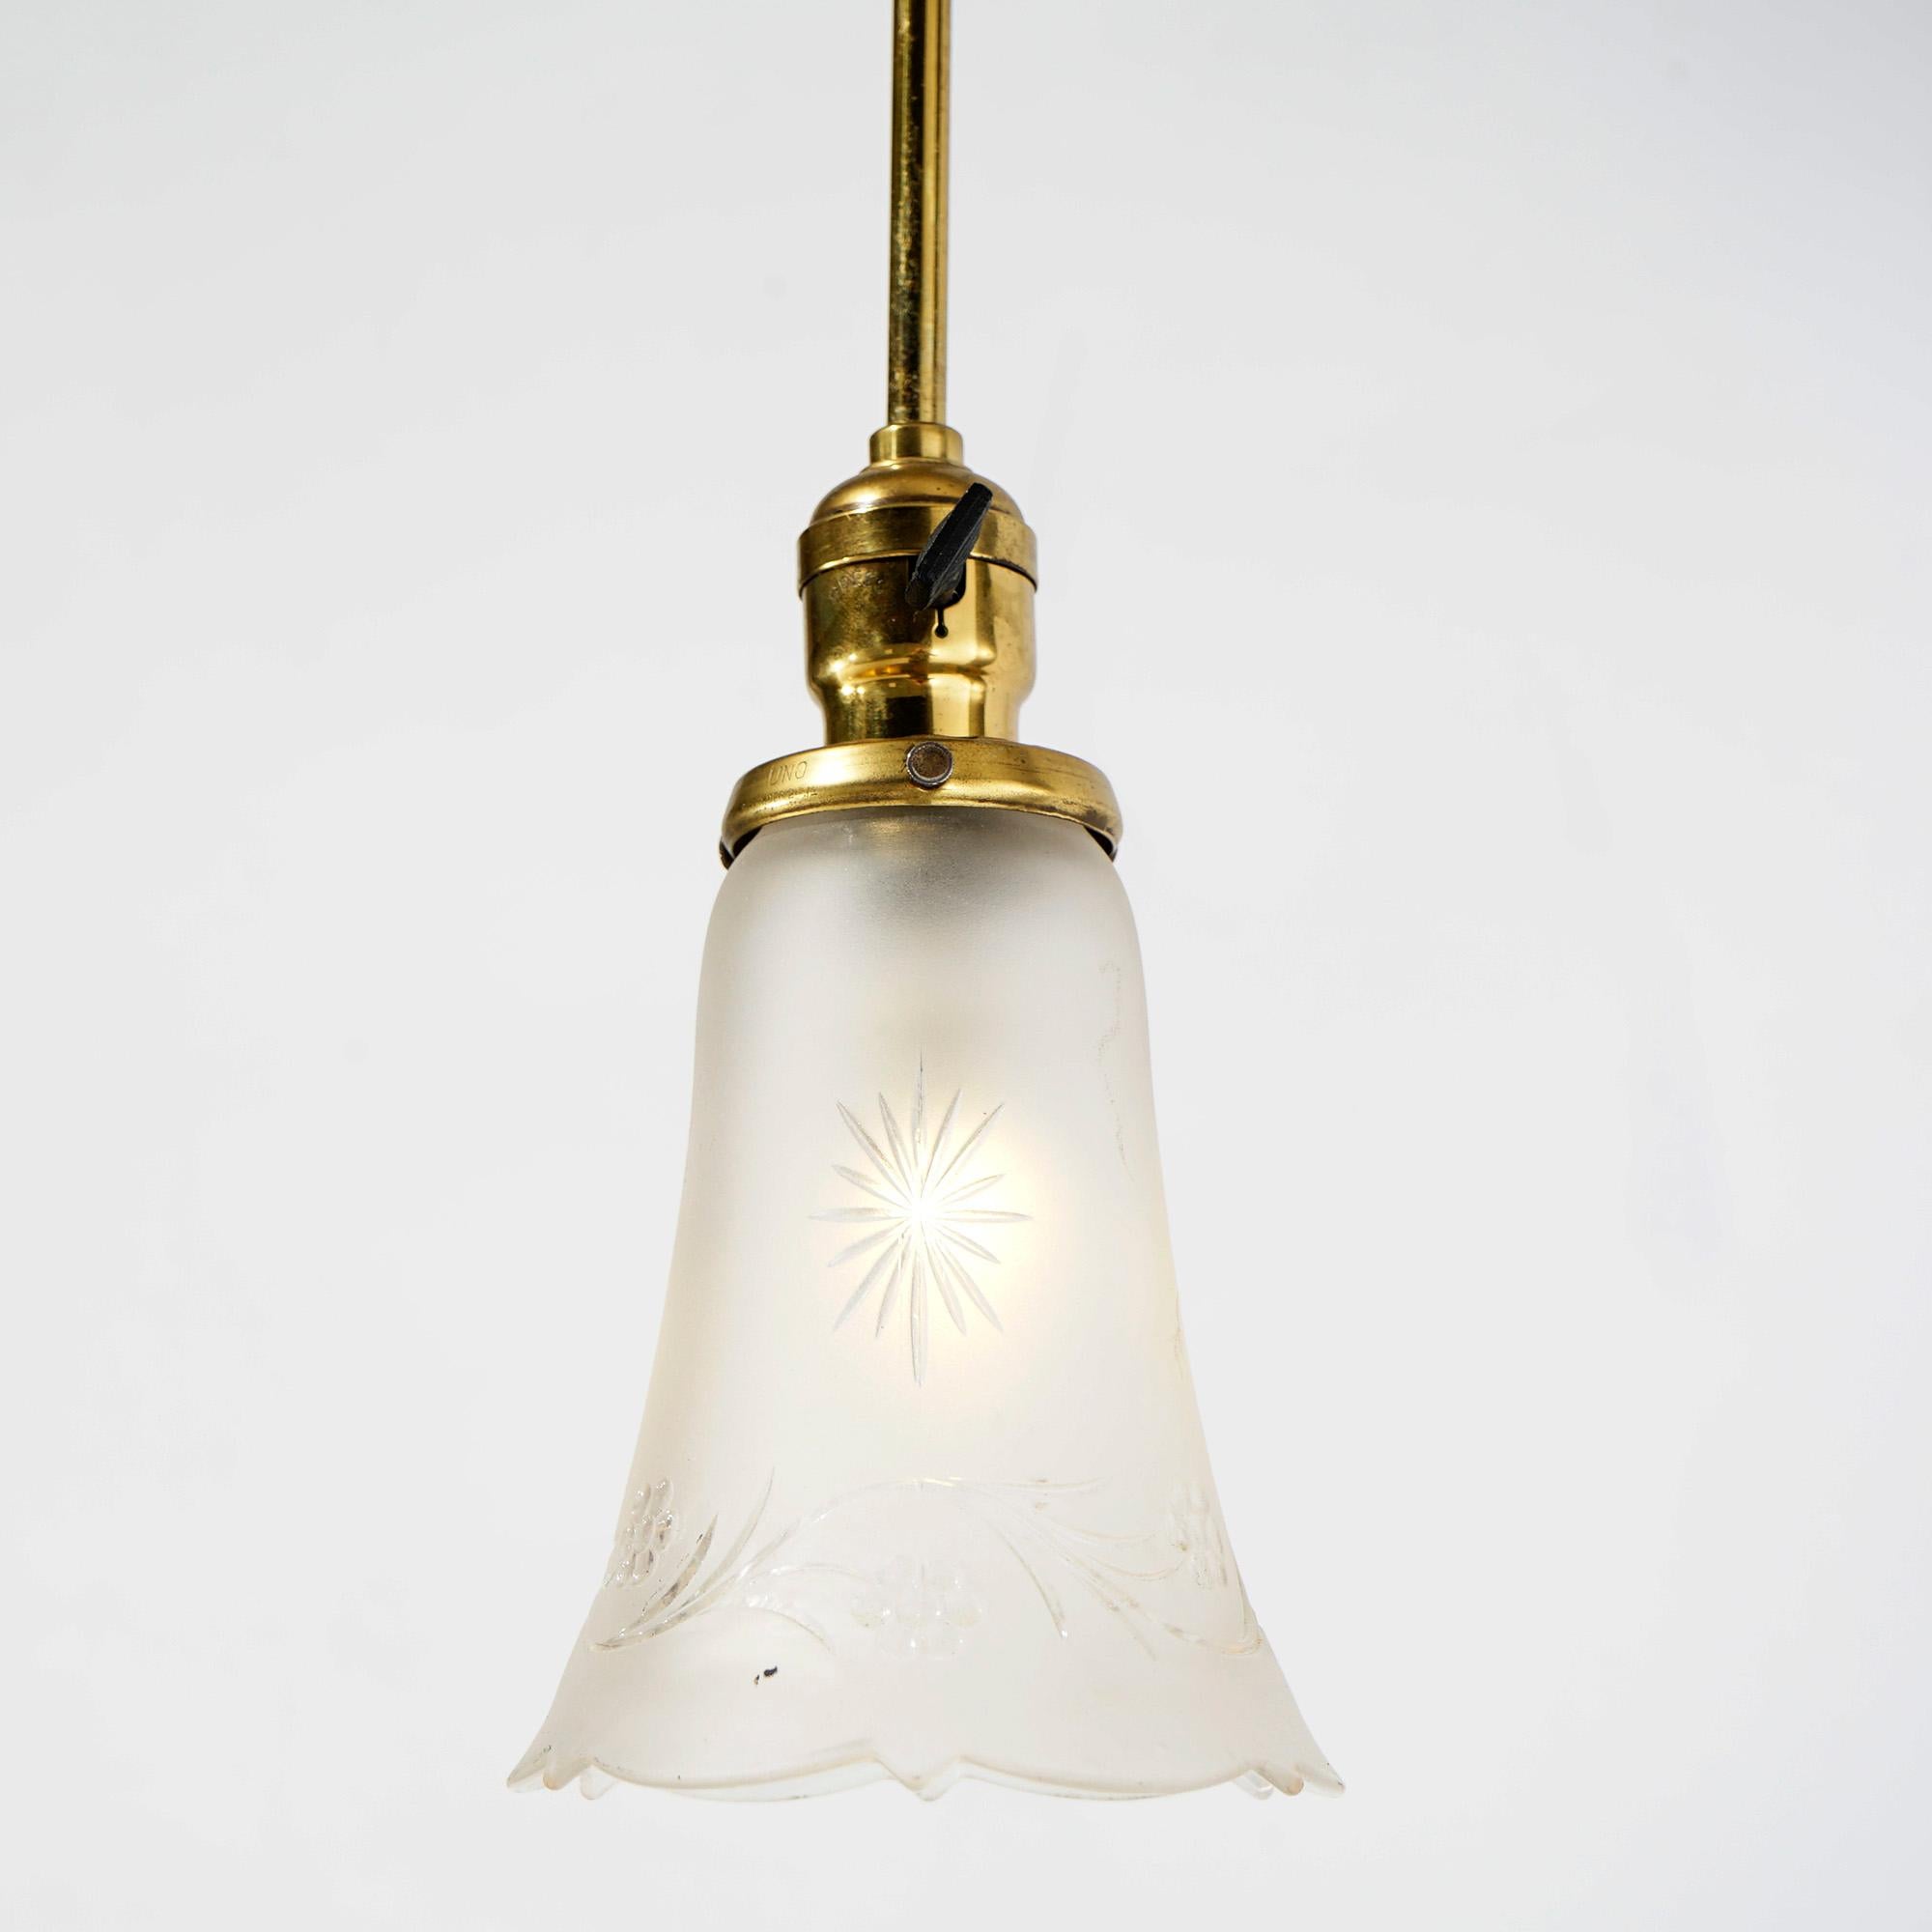 20th Century Antique Brass Hanging Hall Light Fixture Circa 1920 For Sale